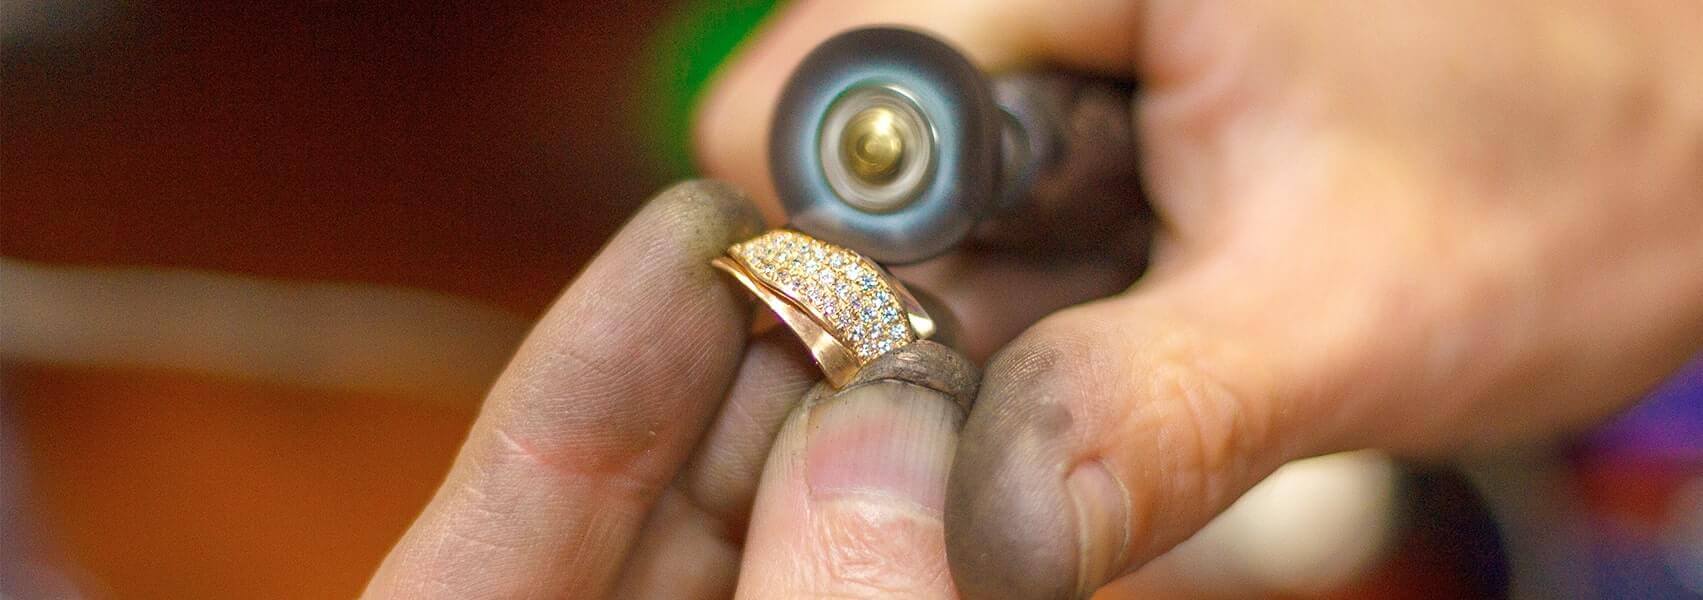 repairing jewelery at a workbench